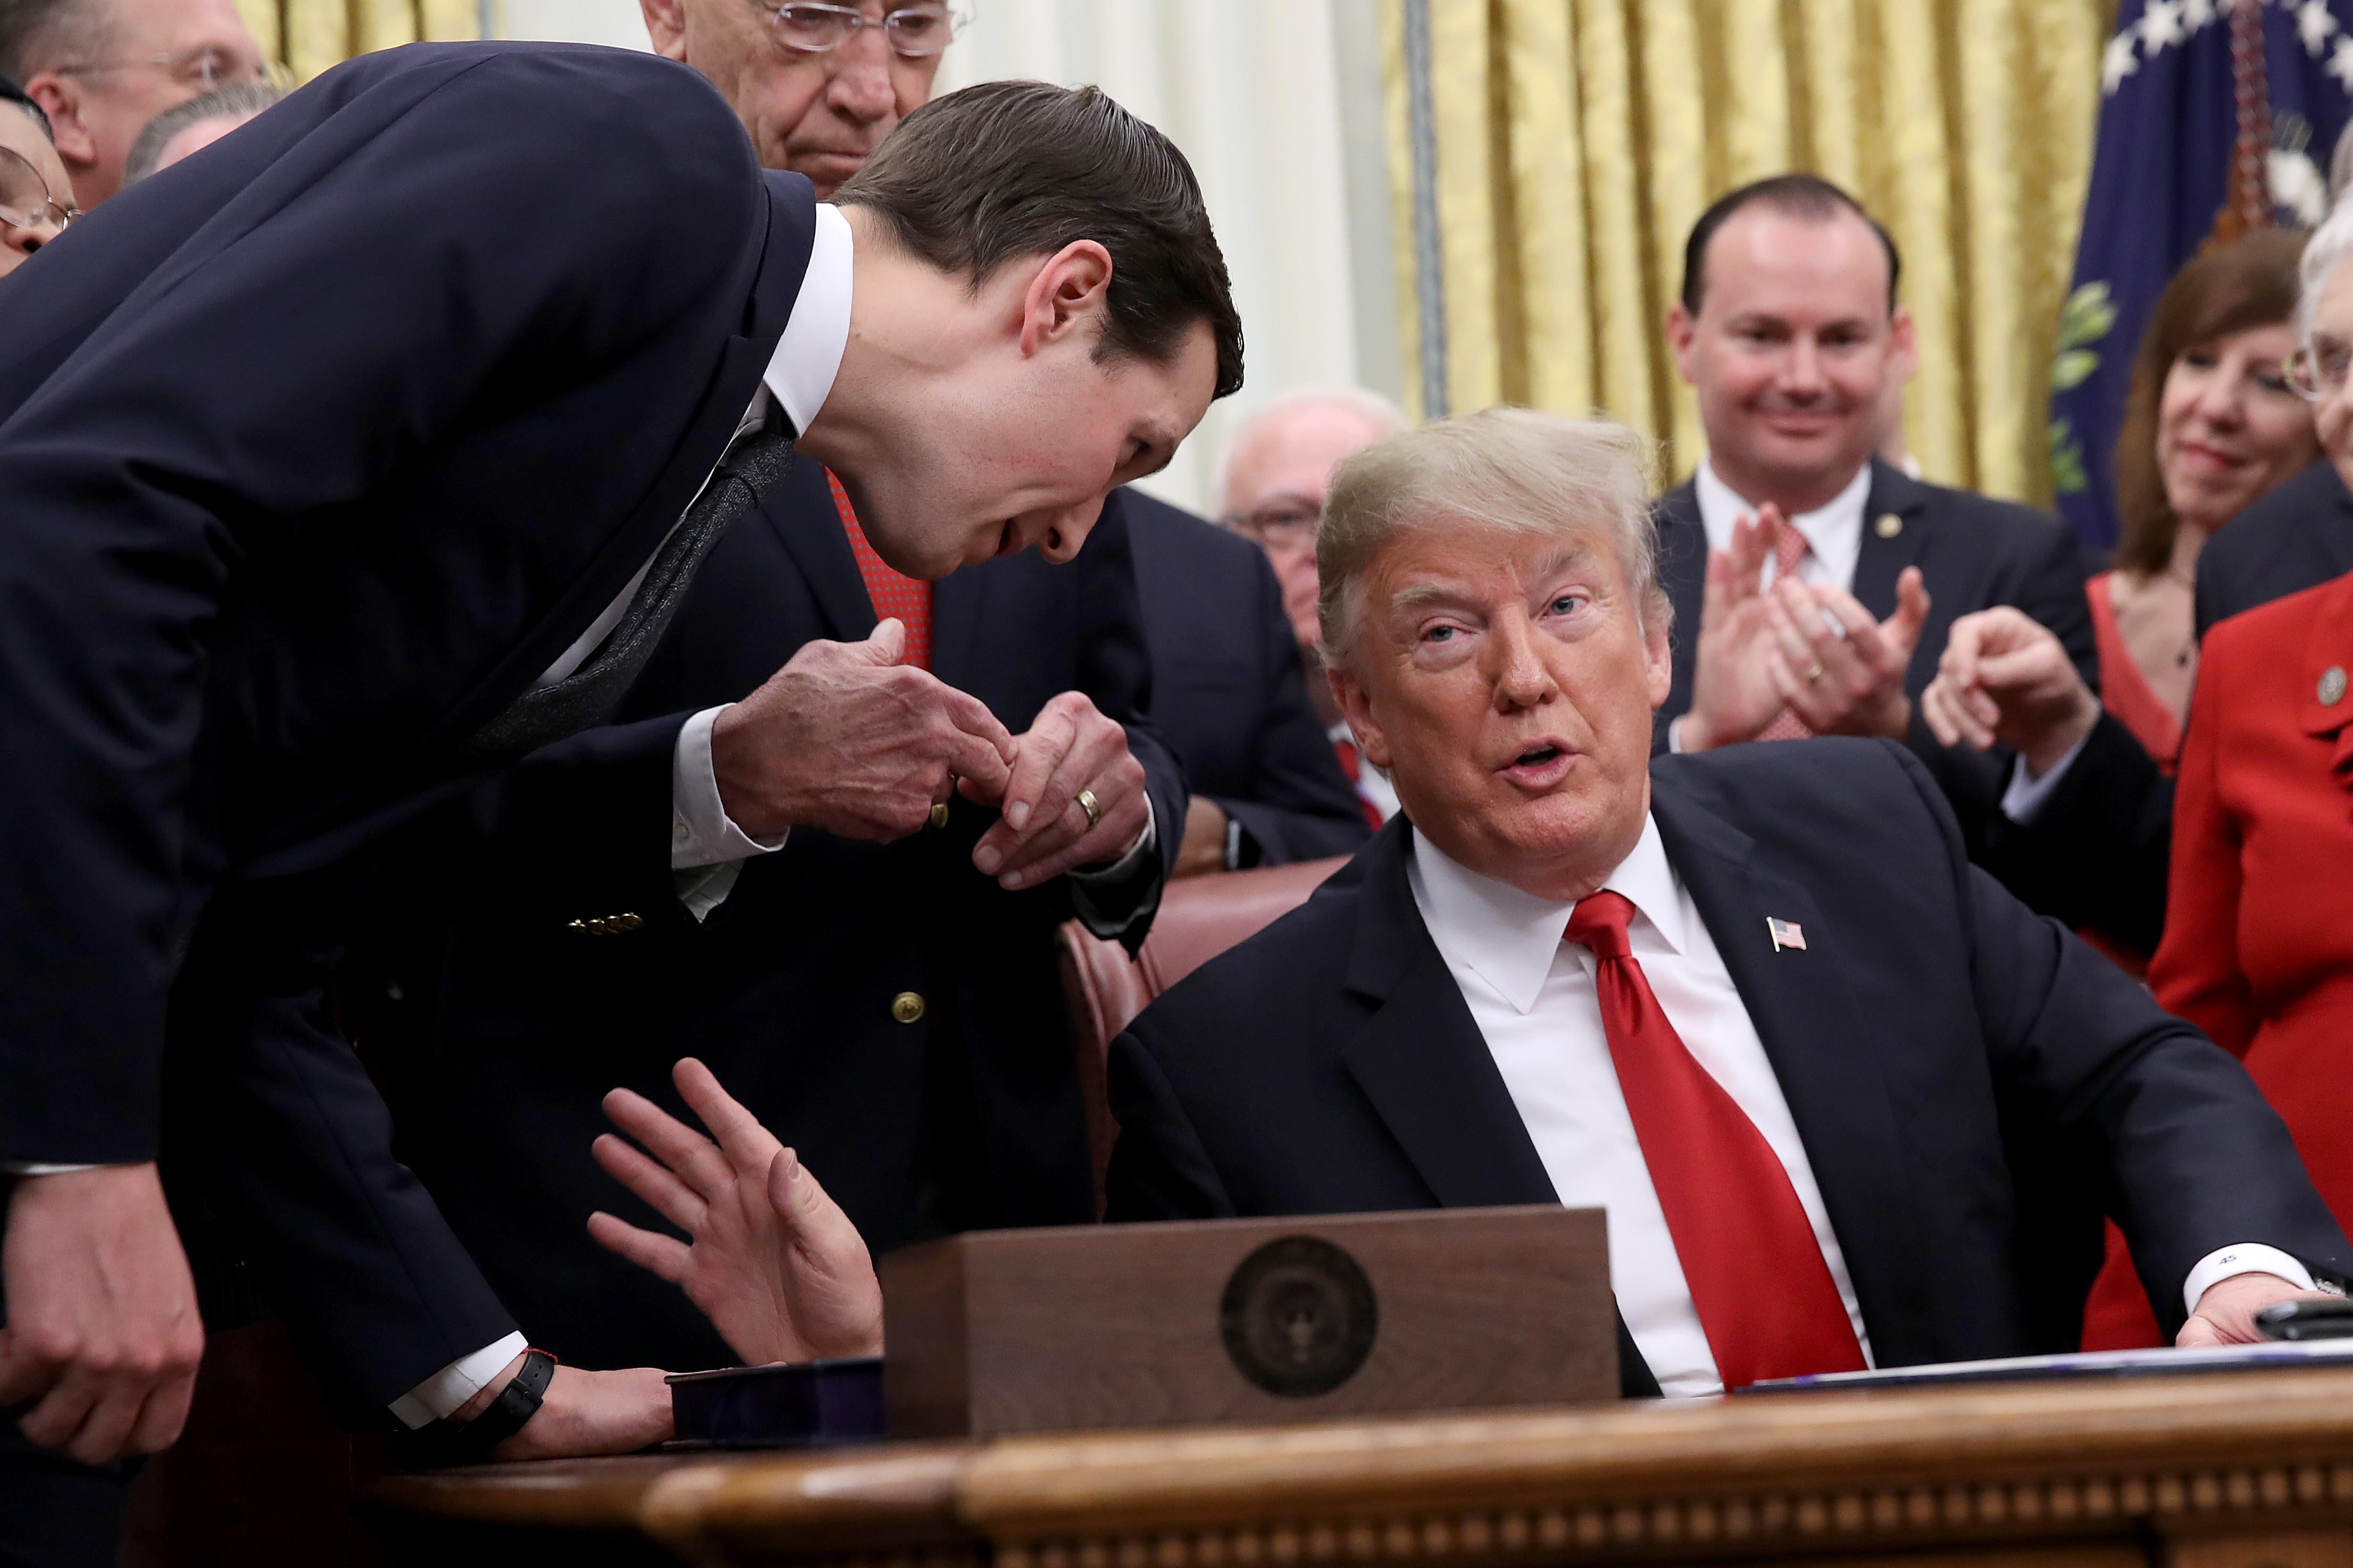 Jared Kushner leans in to speak with President Donald Trump during the signing ceremony for the First Step Act and the Juvenile Justice Reform Act in the Oval Office of the White House December 21, 2018 in Washington, D.C. 